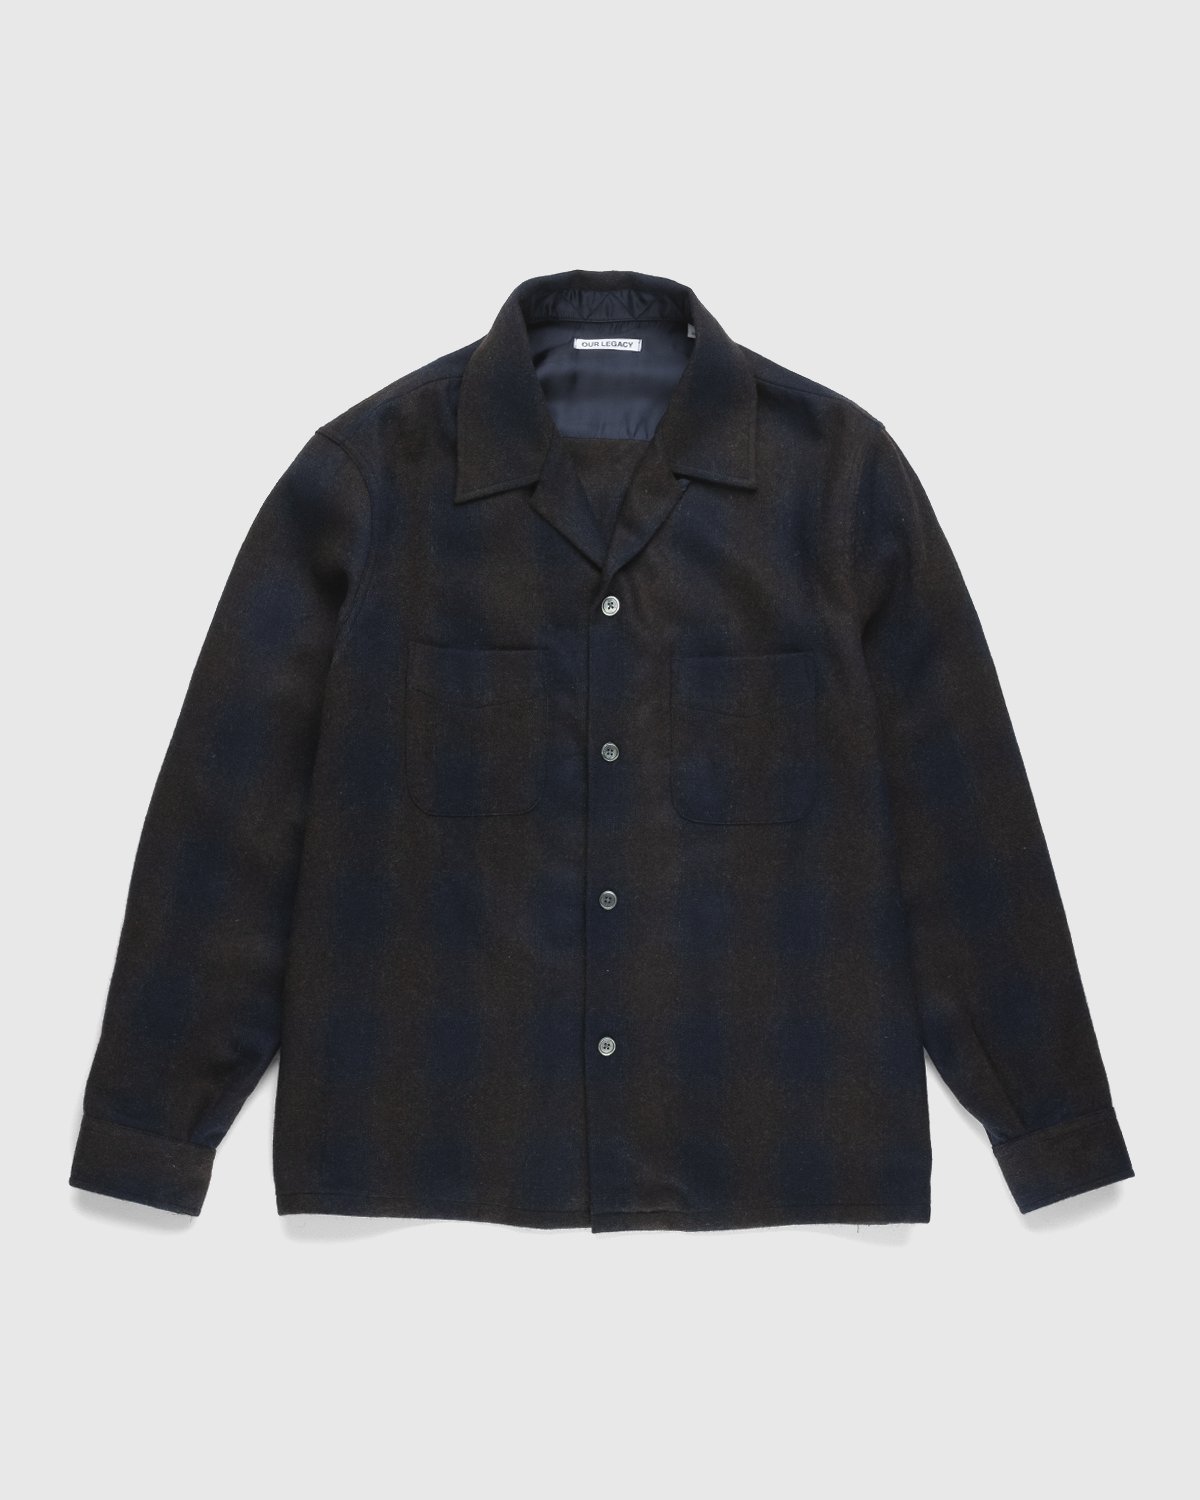 Our Legacy - Heusen Shirt Navy Shadow Check - Clothing - Blue - Image 1